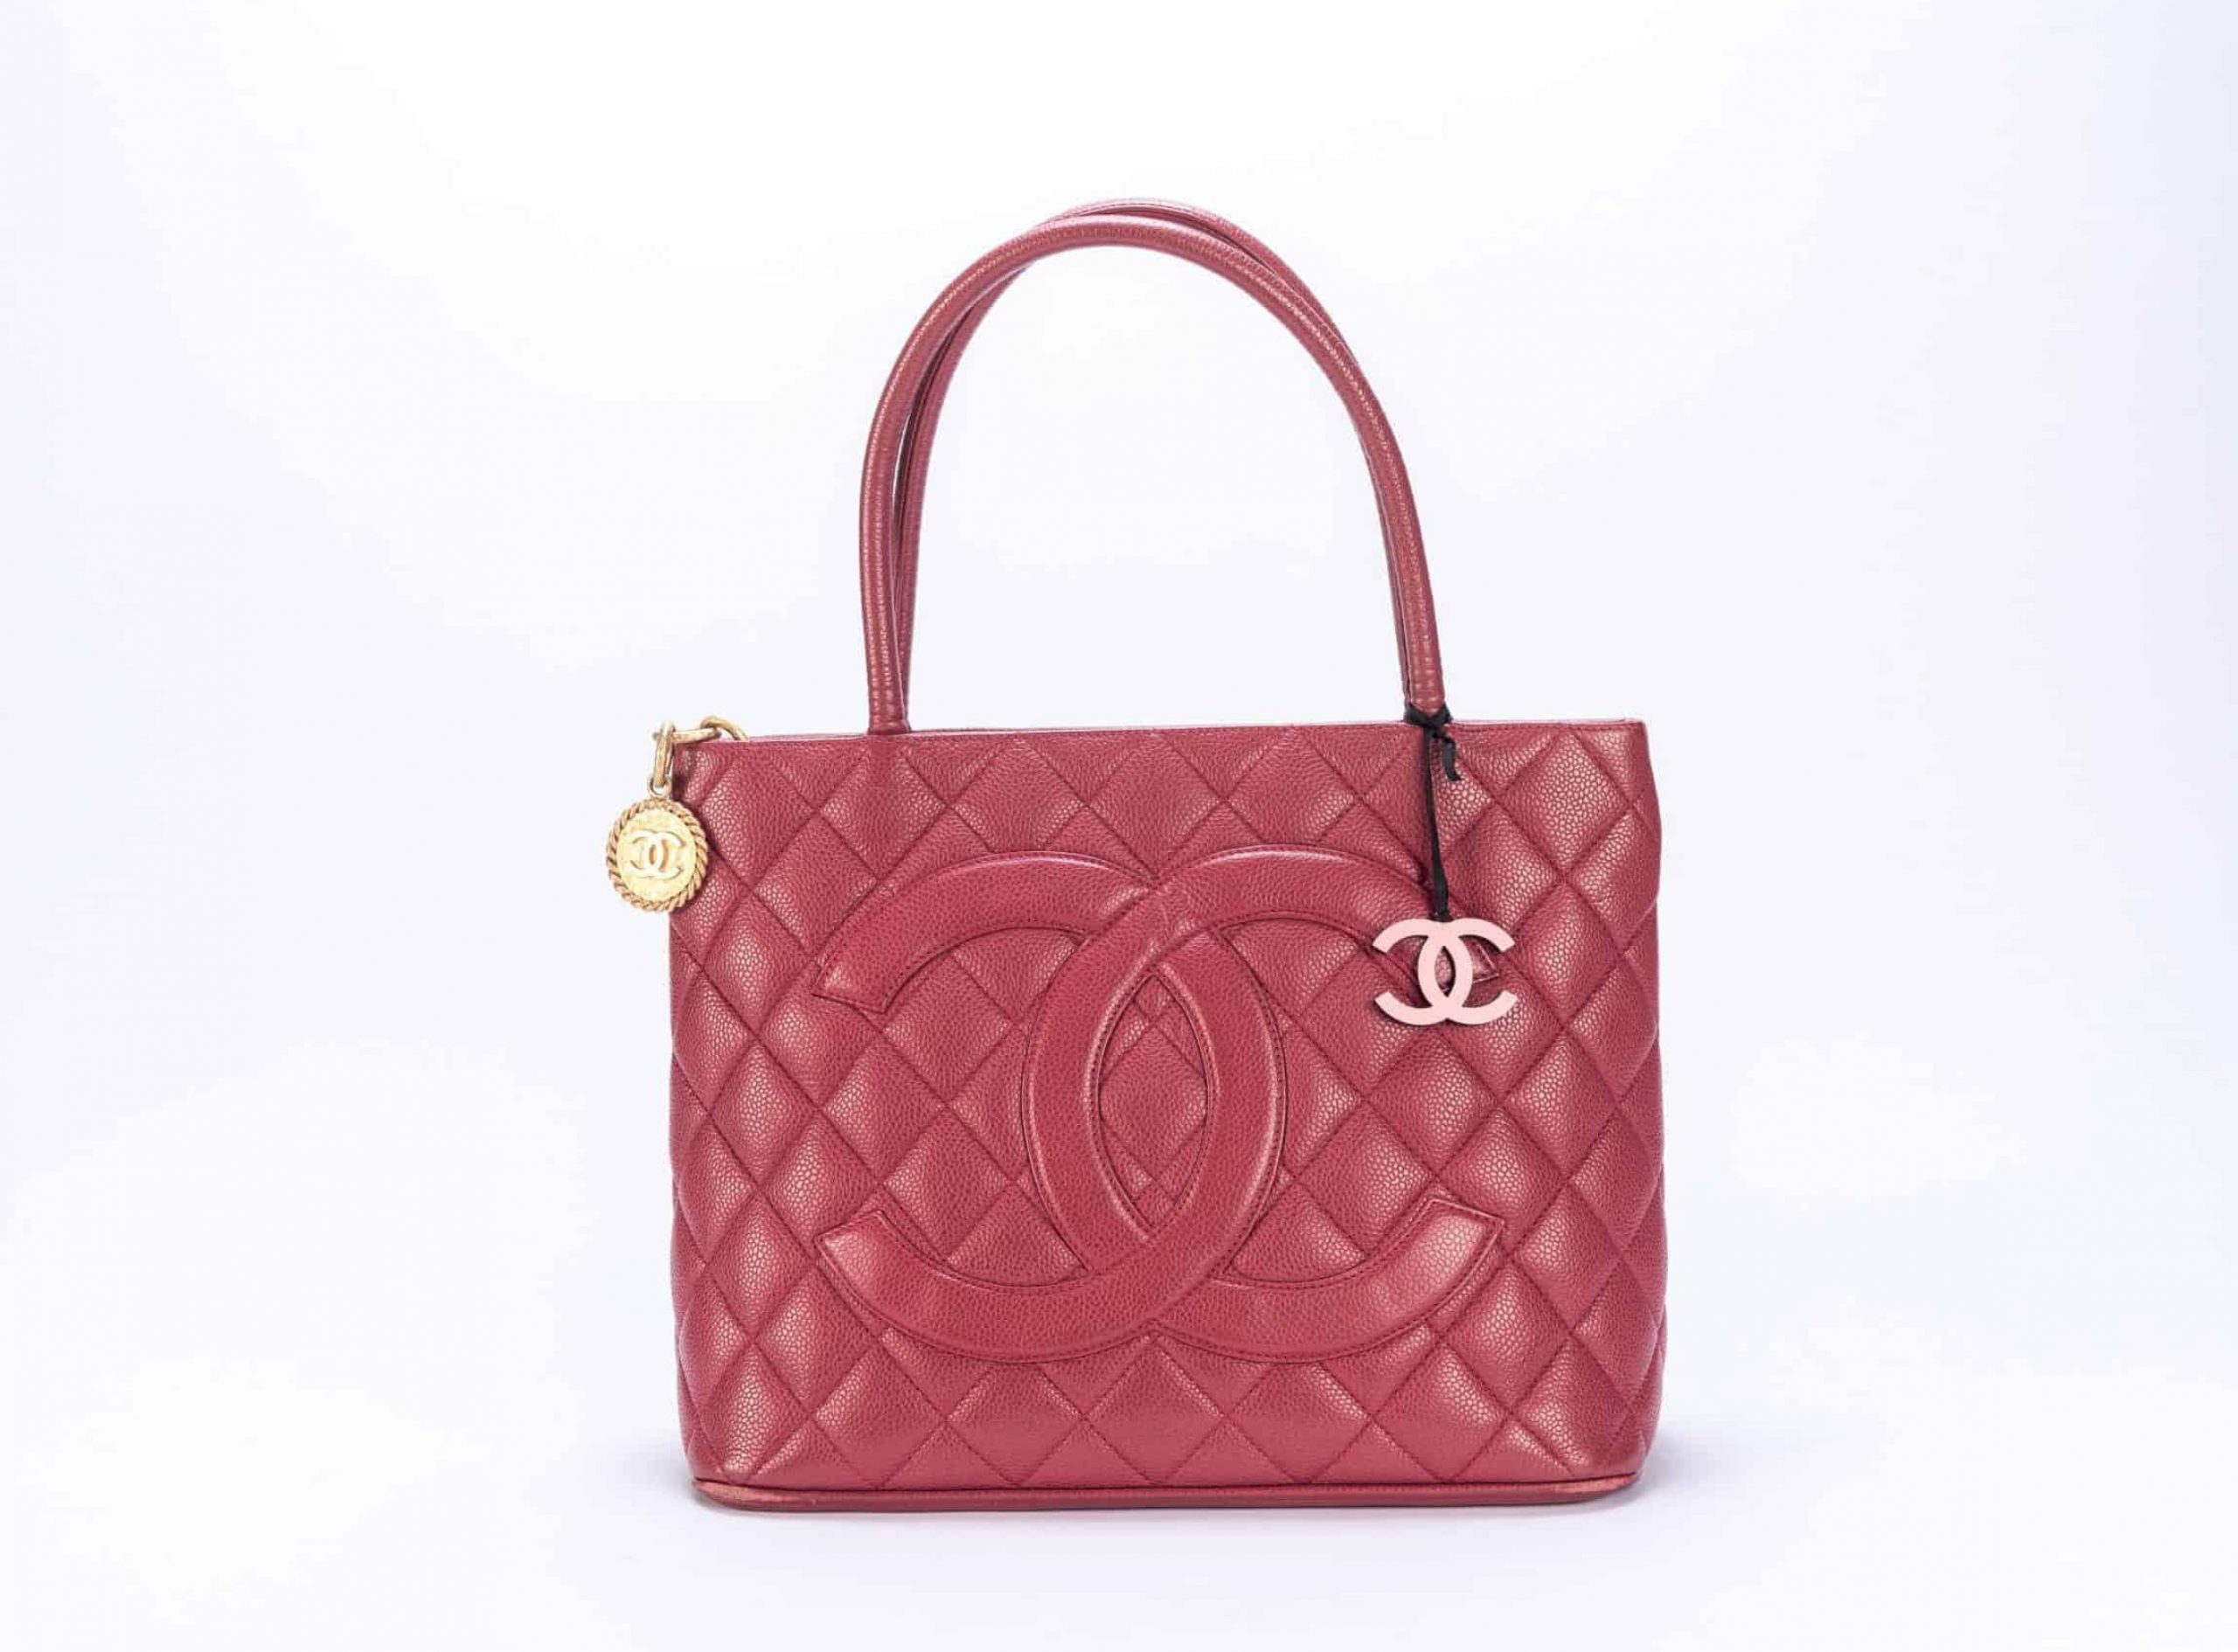 Chanel Caviar Medallion with Gold Hardware in Raspberry (7)